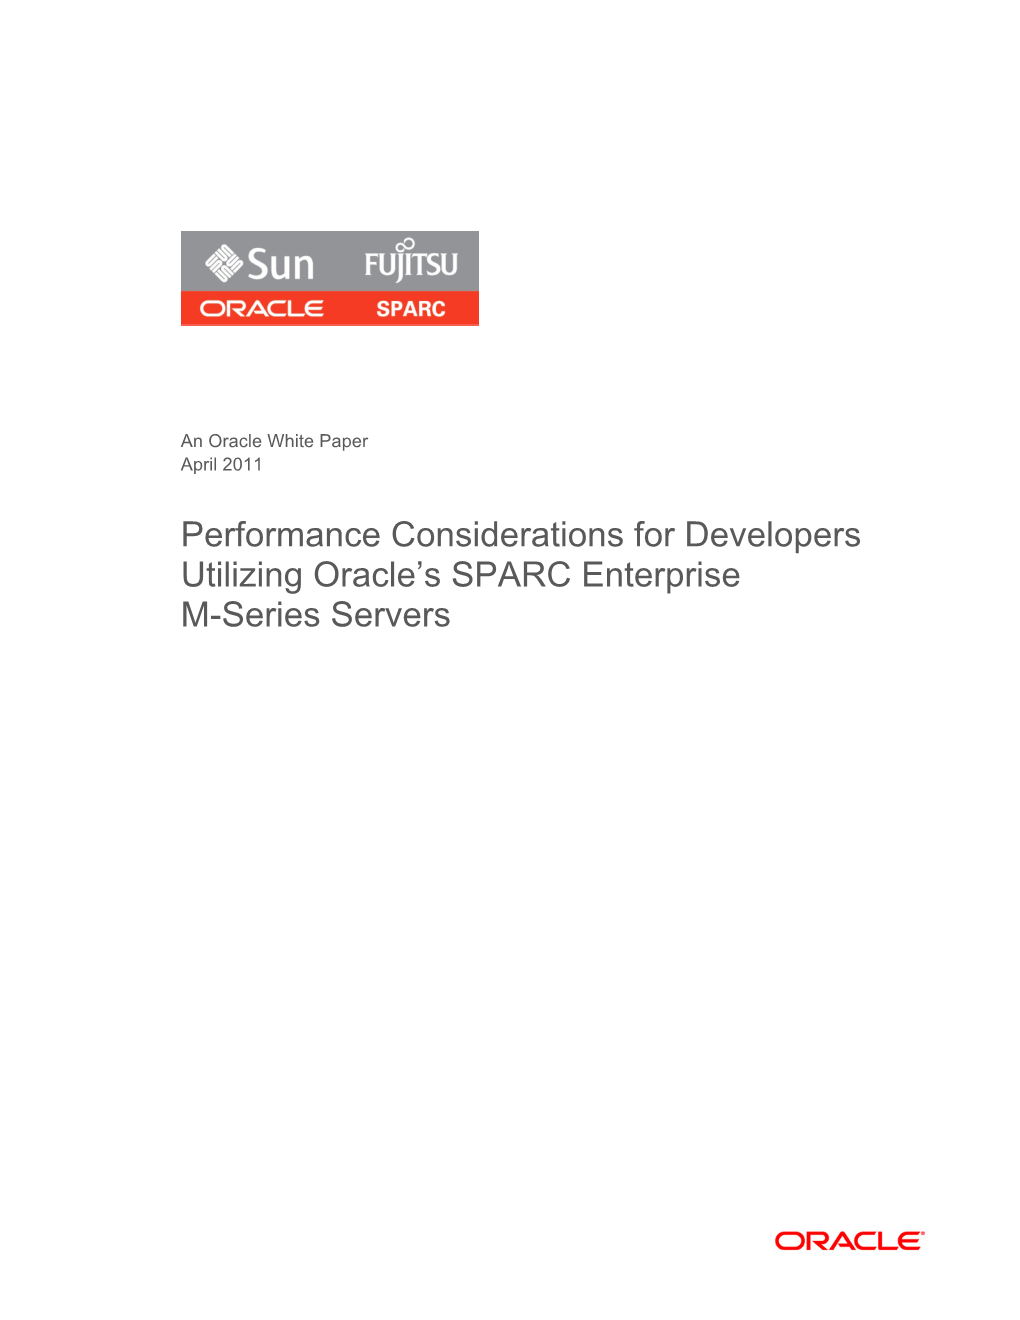 Performance Considerations for Developers Utilizing Oracle’S SPARC Enterprise M-Series Servers